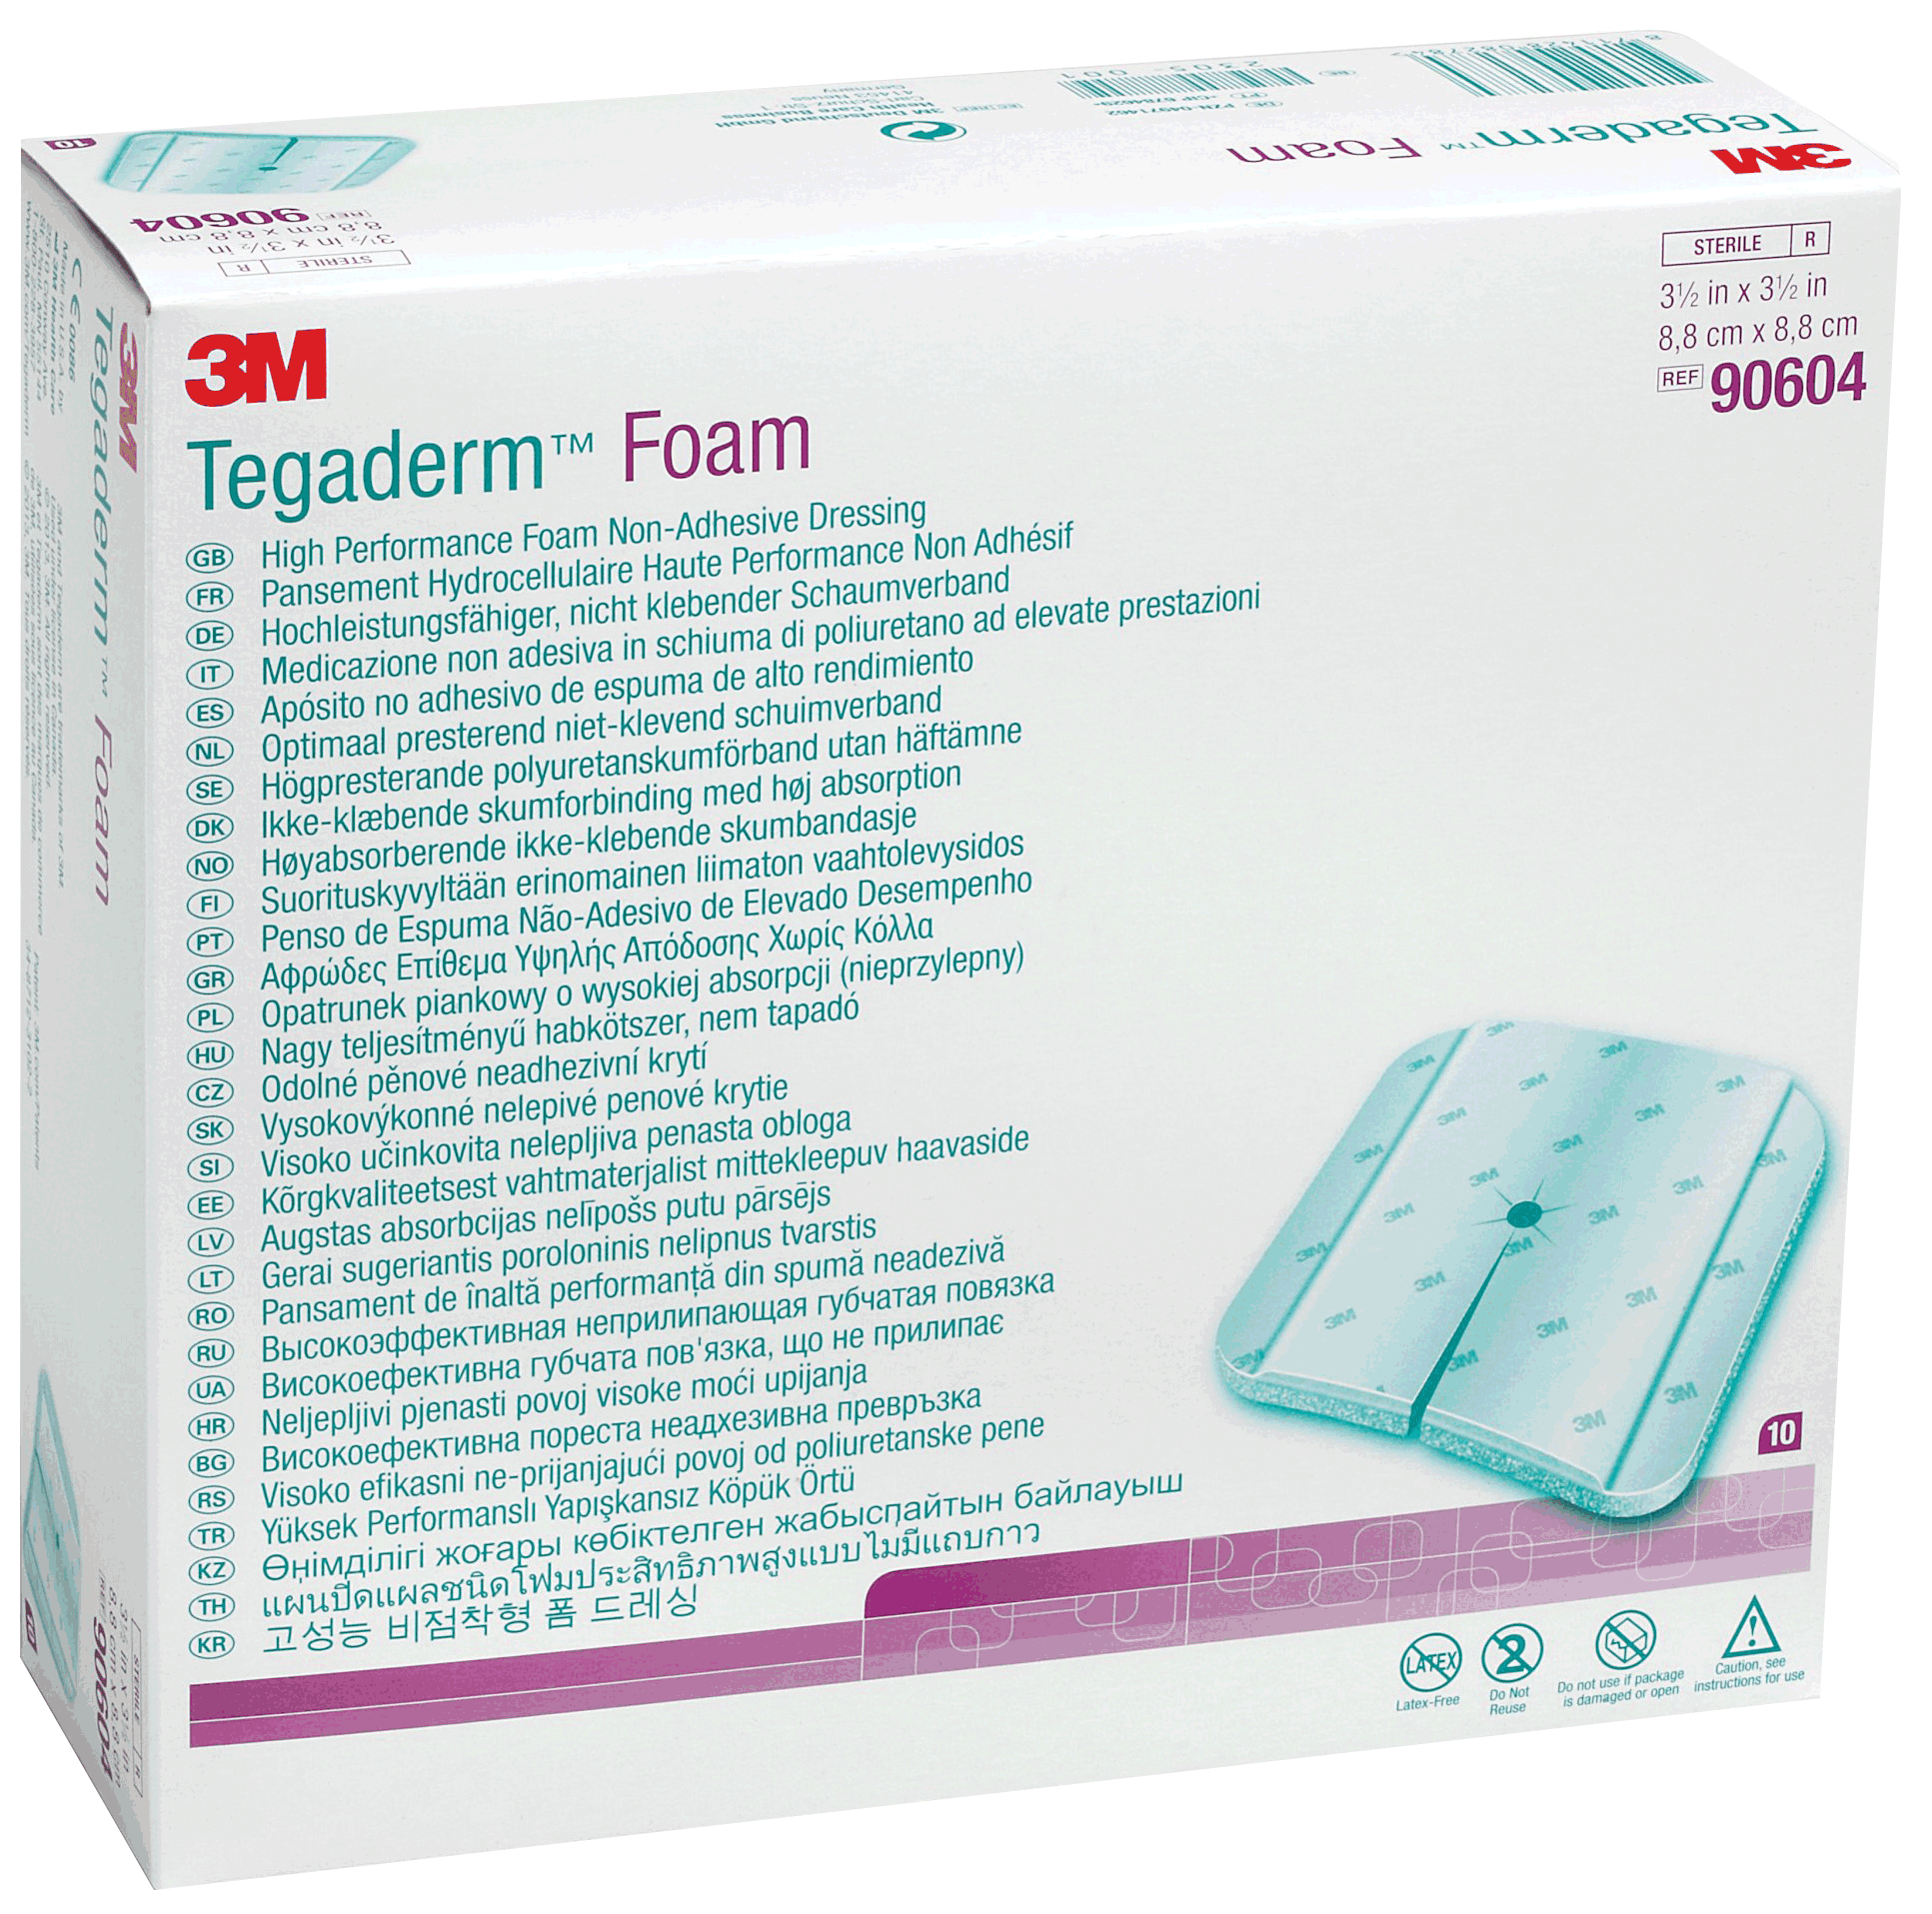 CA/30 - 3M Tegaderm&trade; Non Adhesive Foam Dressing with Highly Breathable Film Backing, Sterile, Latex Free, 8" x 8" - Best Buy Medical Supplies